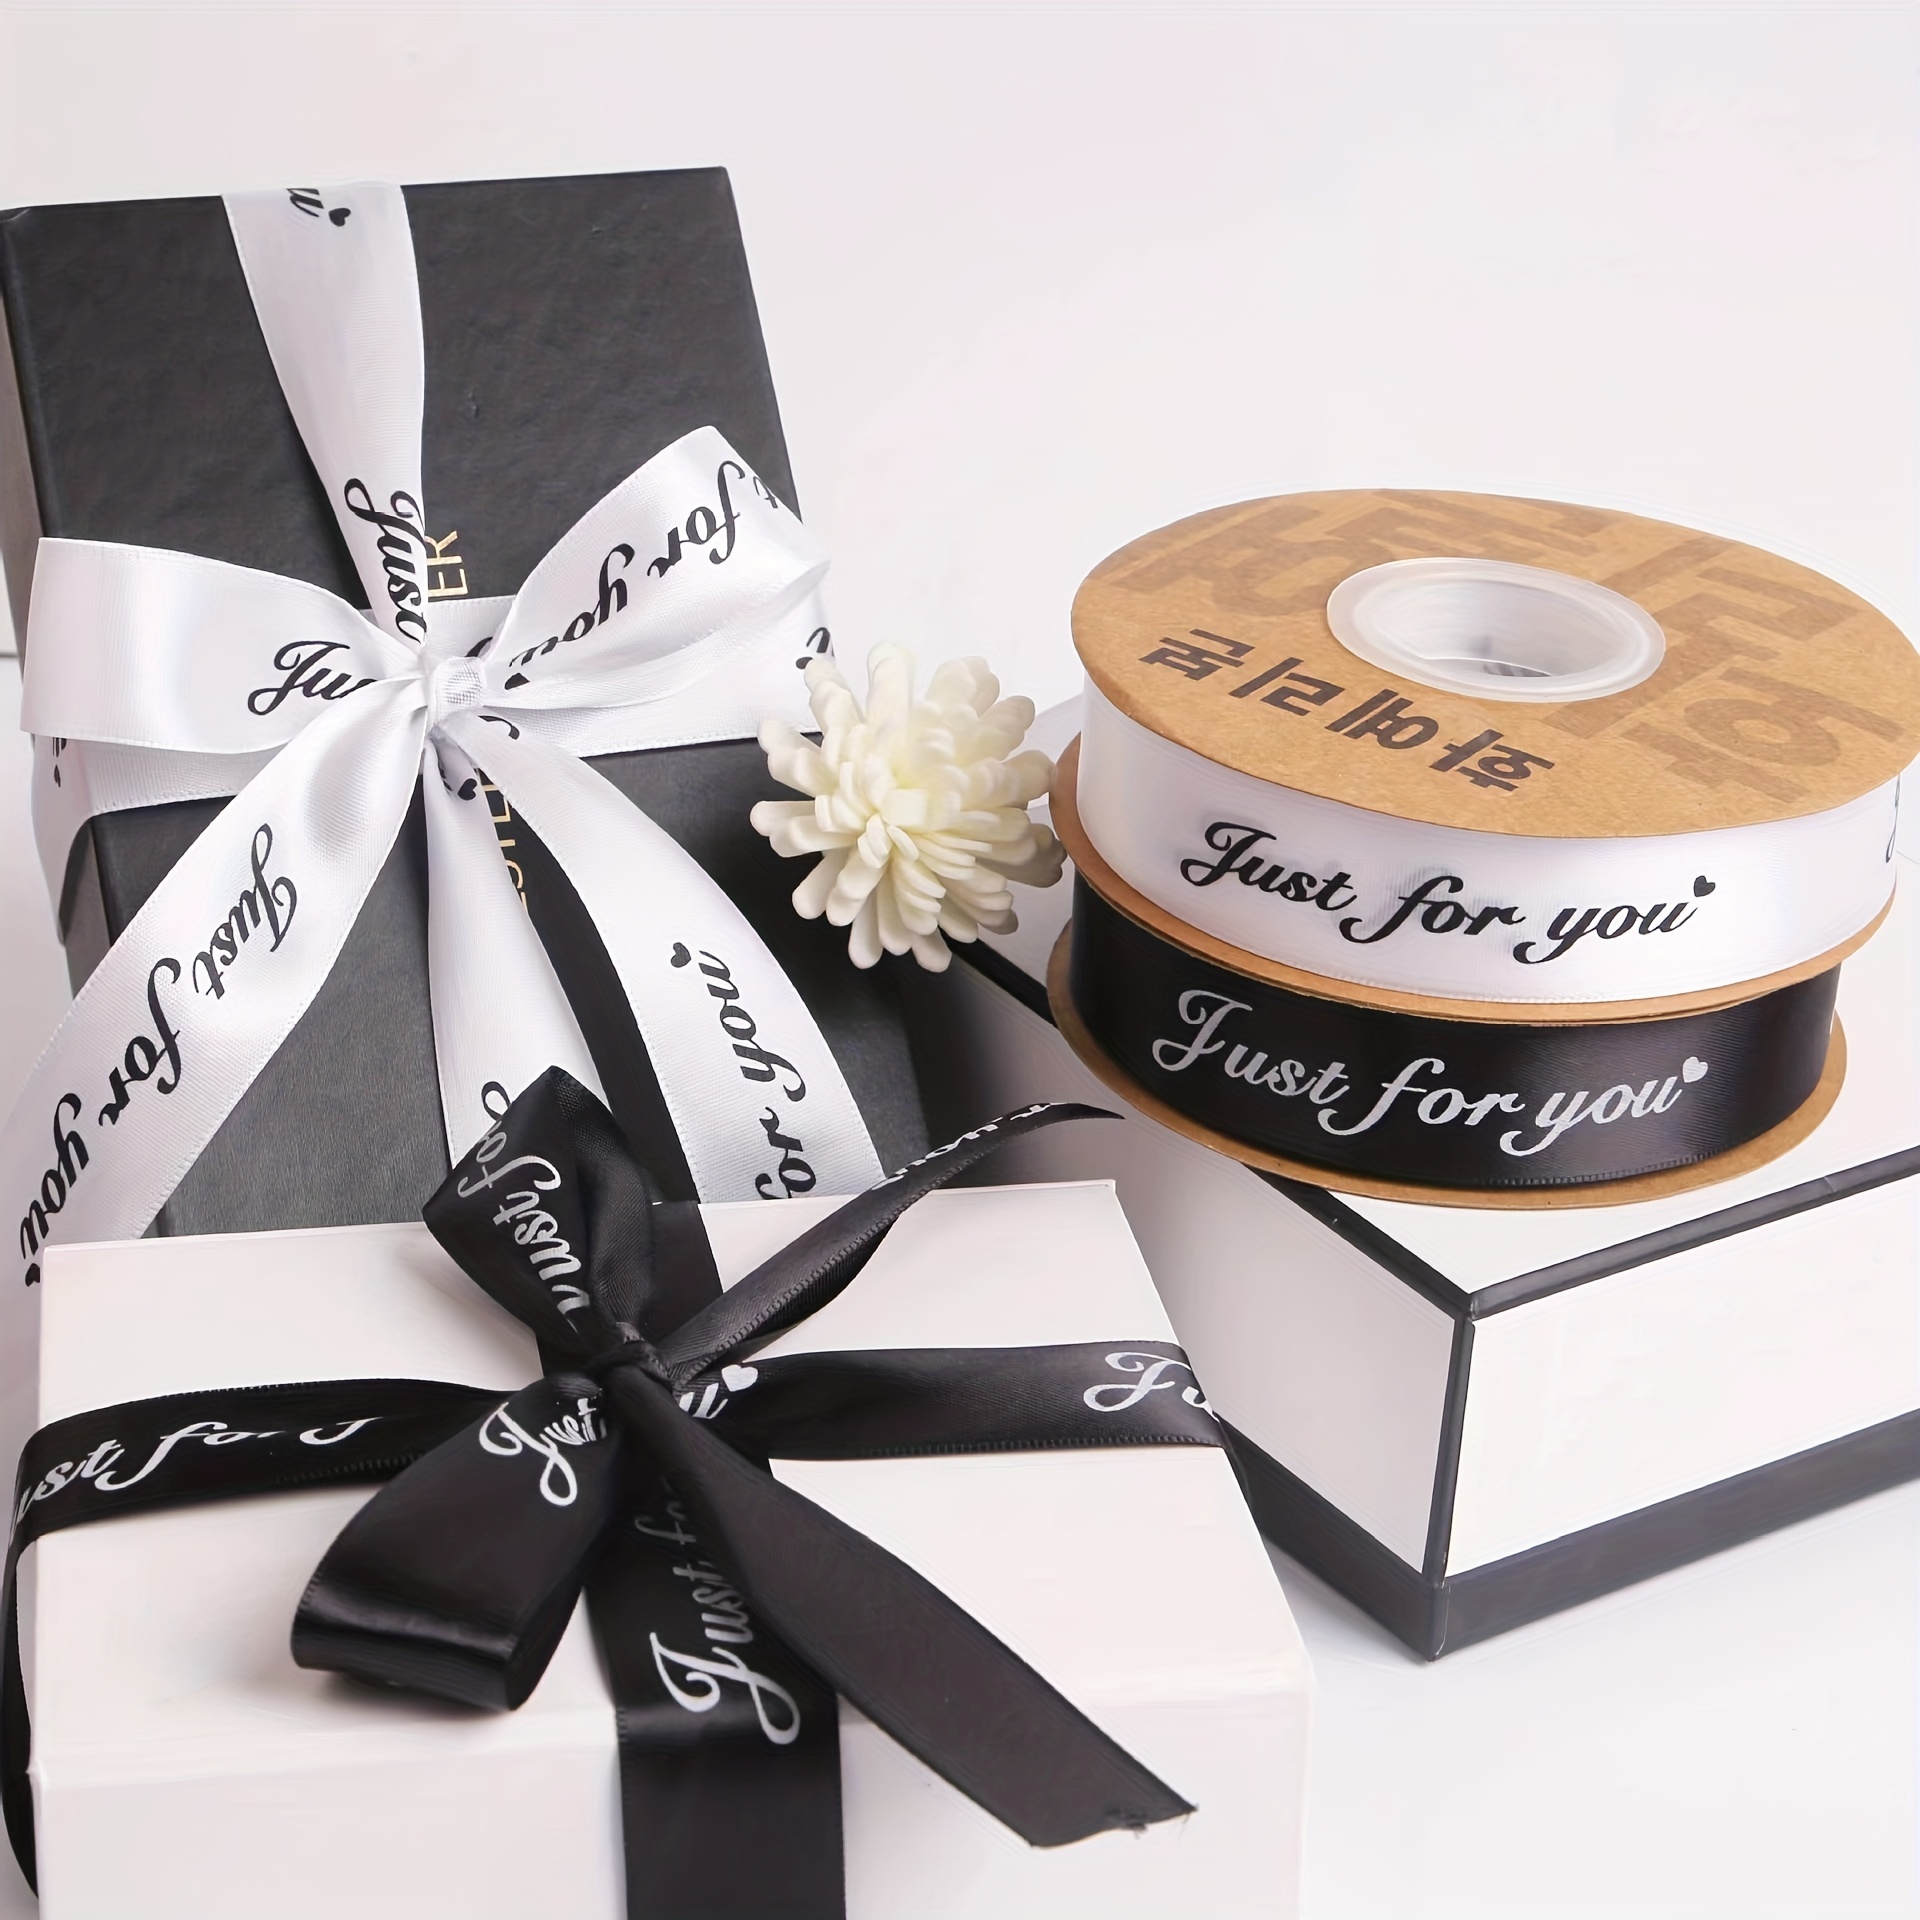 Just For You Ribbon For Flower Bouquet and Gift Wrapping - 1 inch